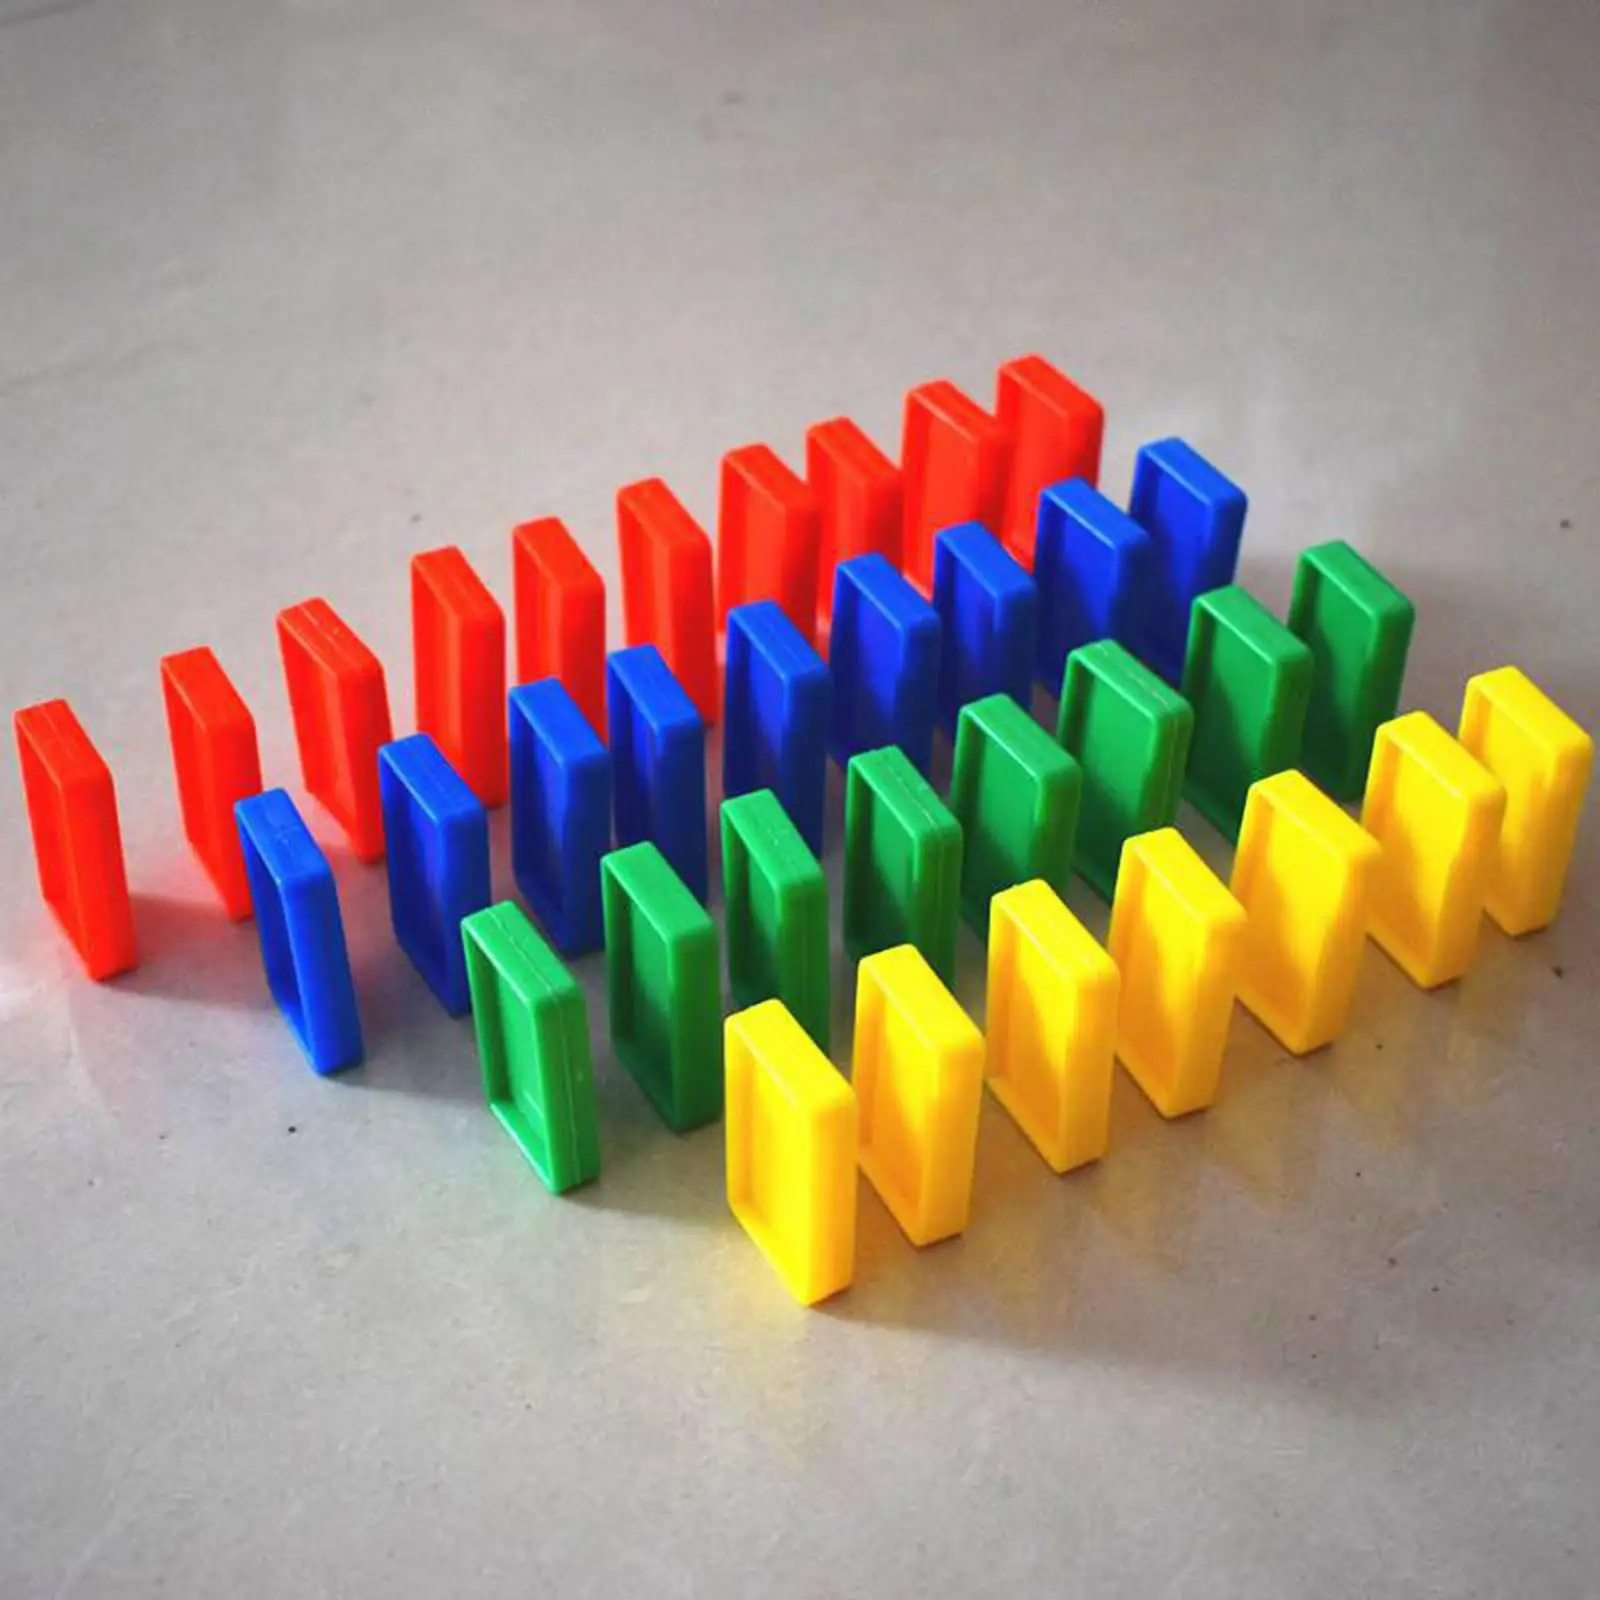 100Pcs Dominoes Train Blocks Set Game Building for Birthday Gifts